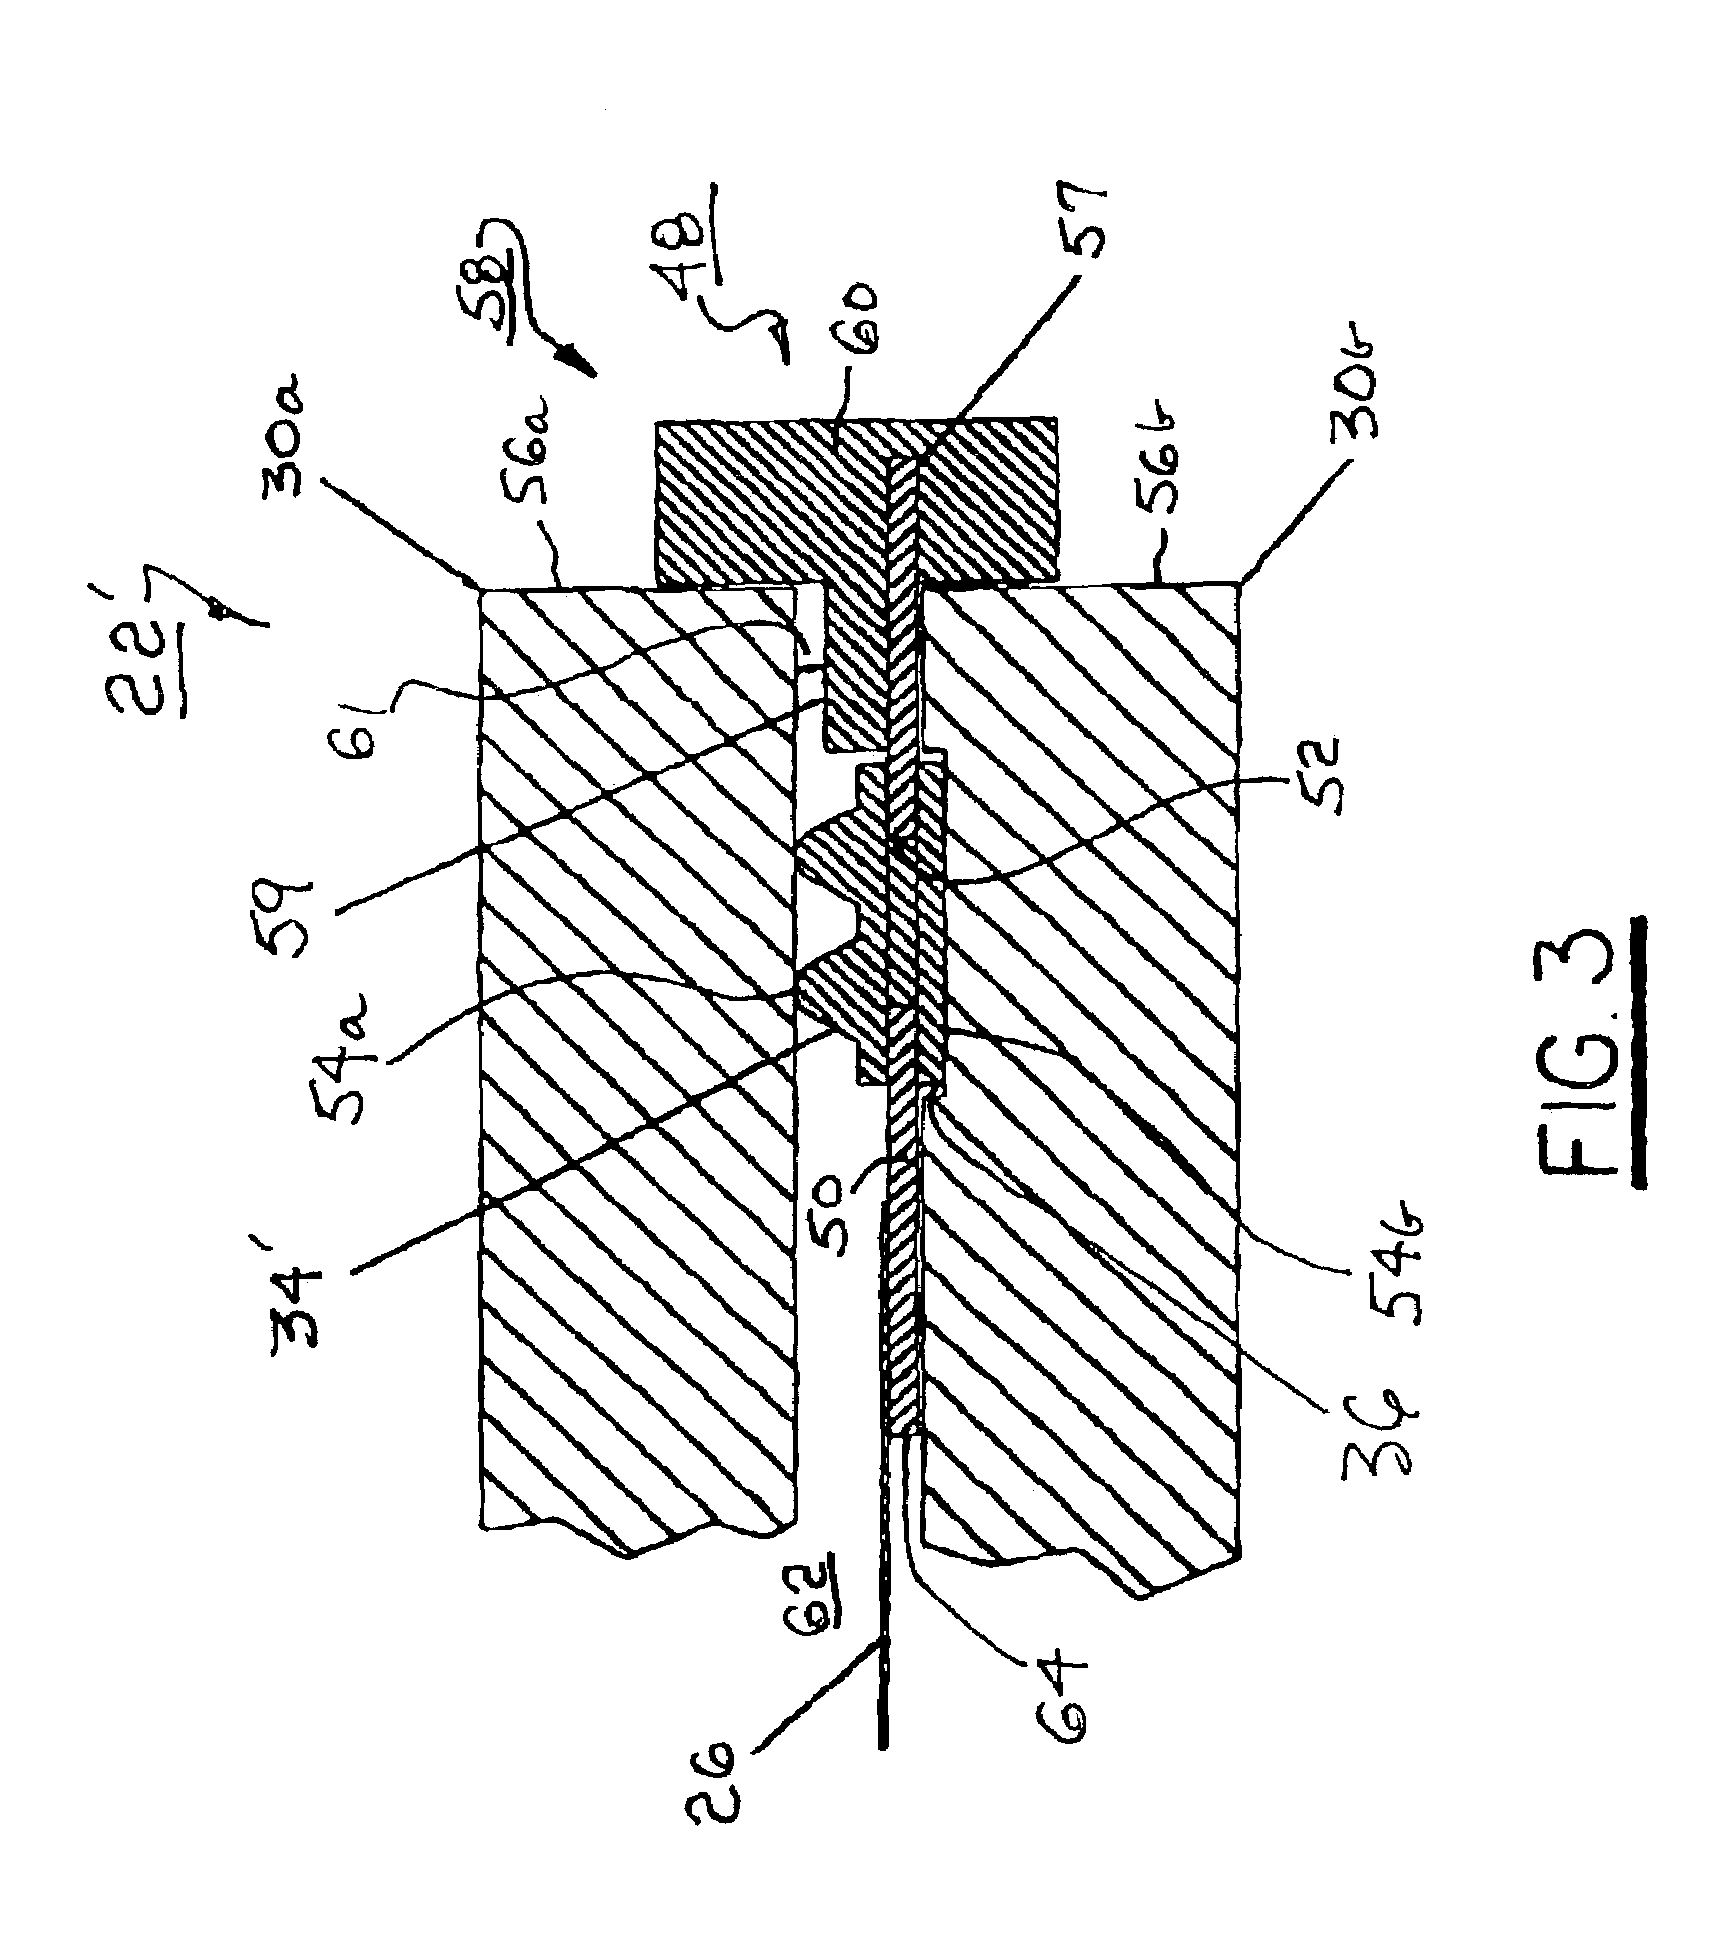 Method of forming a gasket assembly for a PEM fuel cell assembly